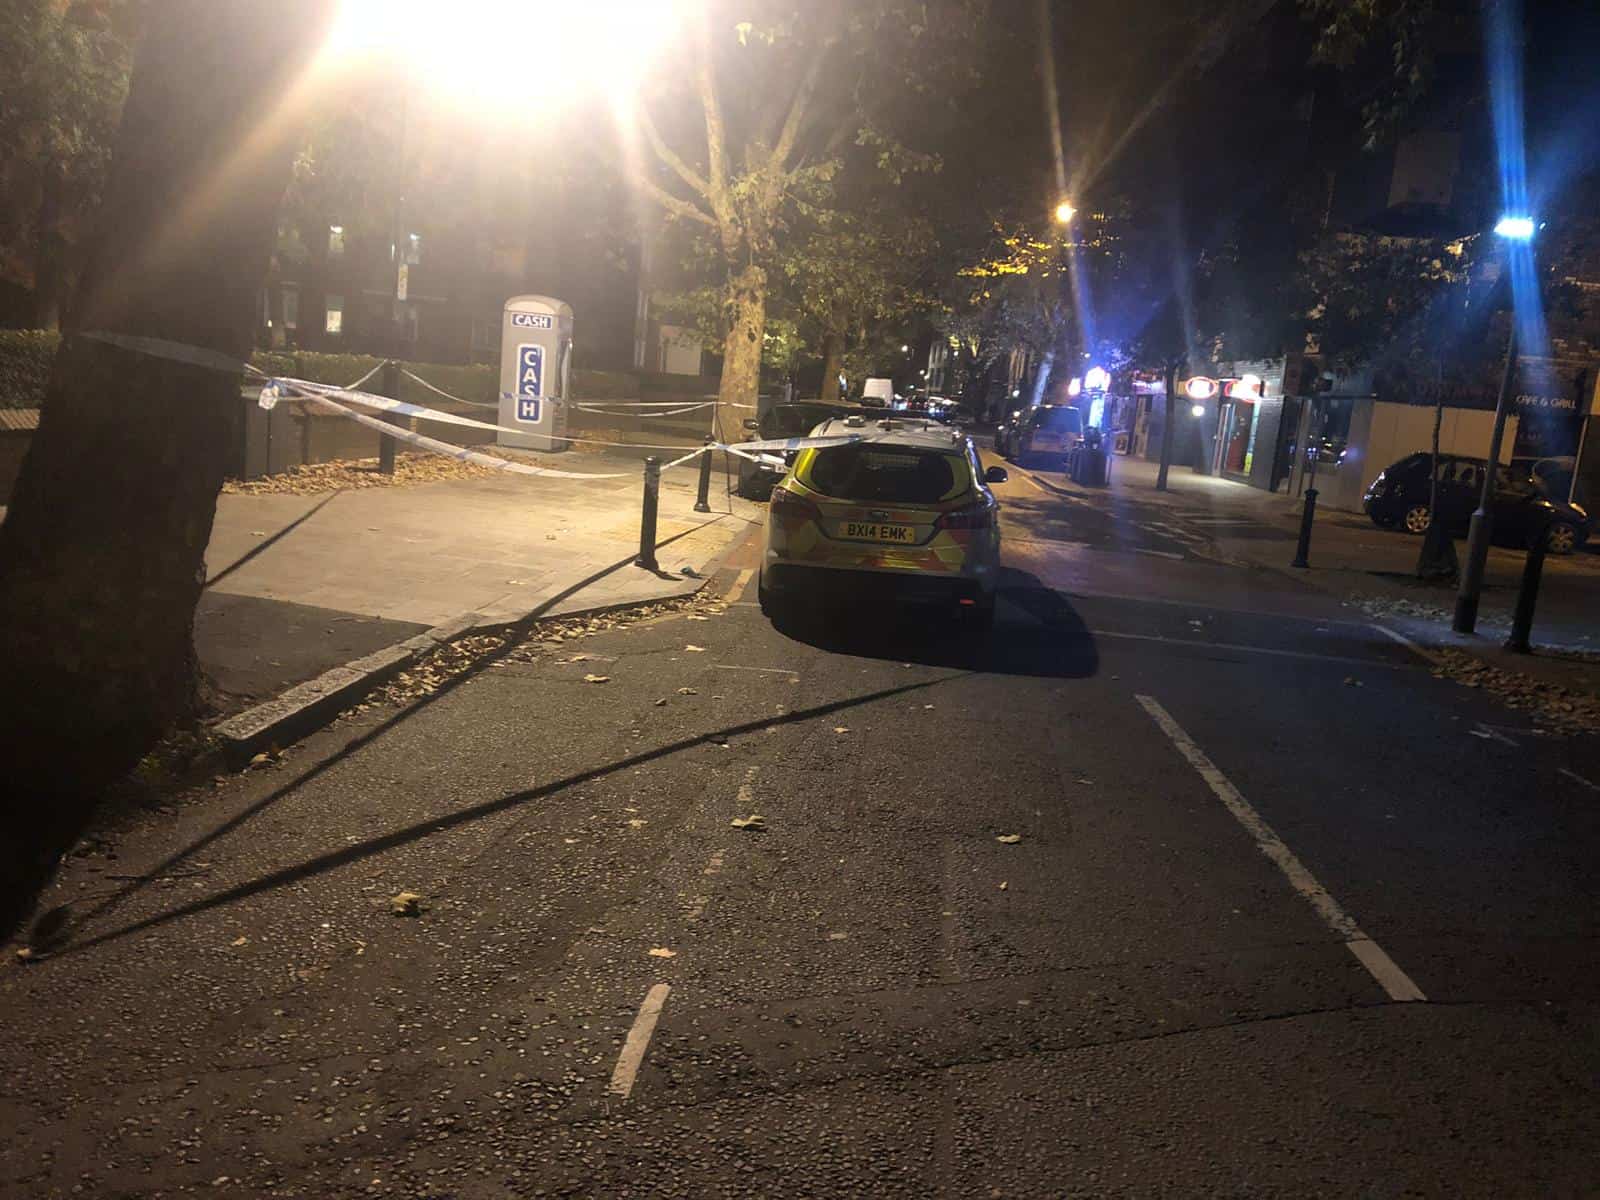 Police set up a cordon around Spa Road while they dealt with the attack on Monday evening